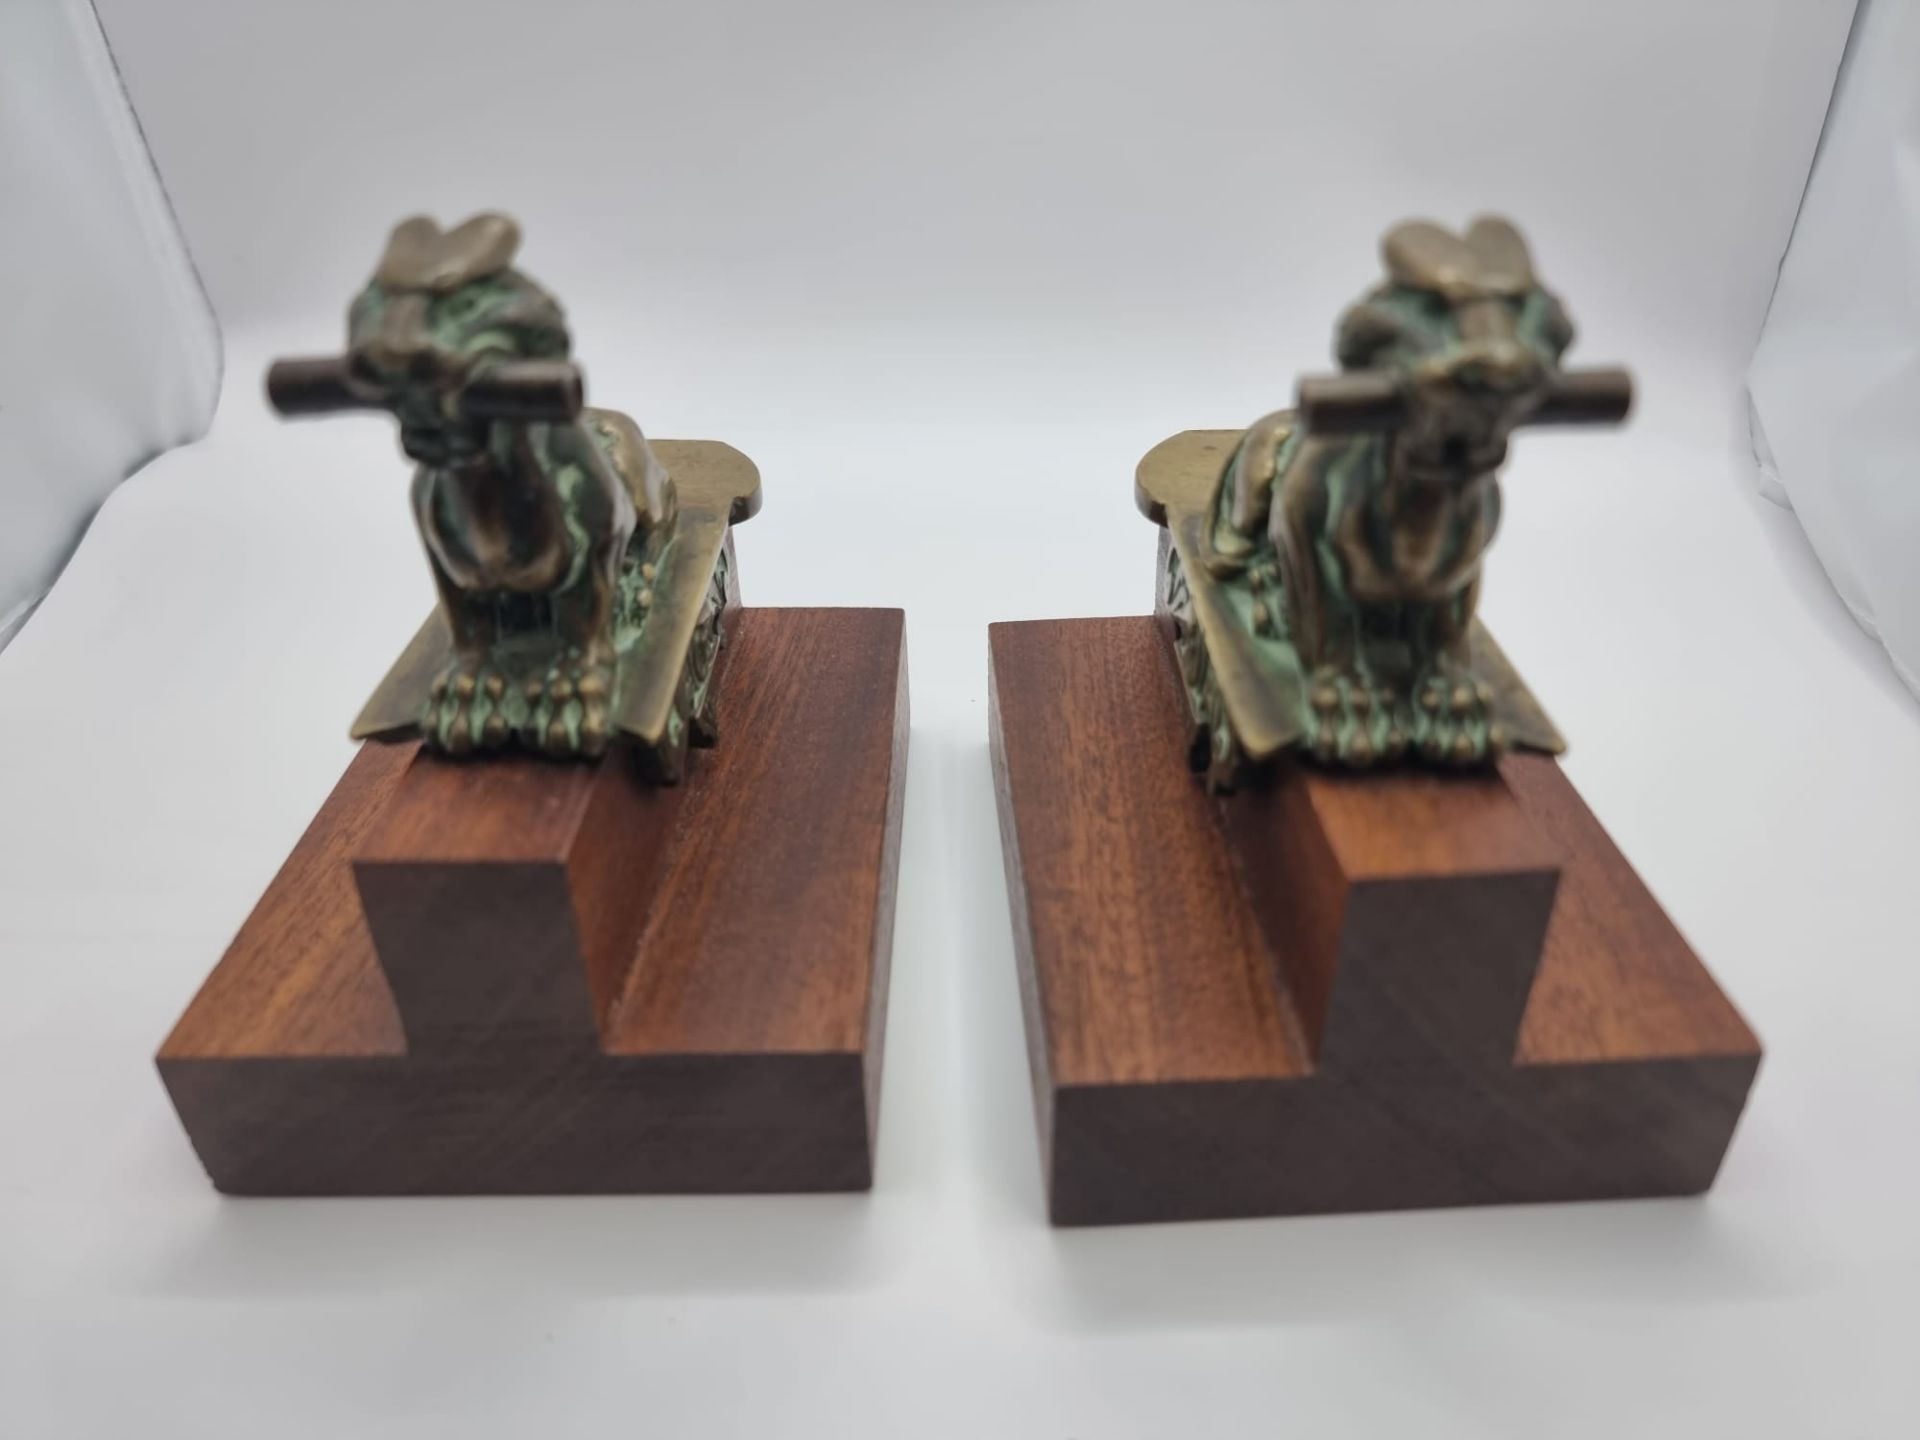 Pair Of 19th Century Decorative Bronze Lions later added to wooden plinth thus converted as Bookends - Image 3 of 10